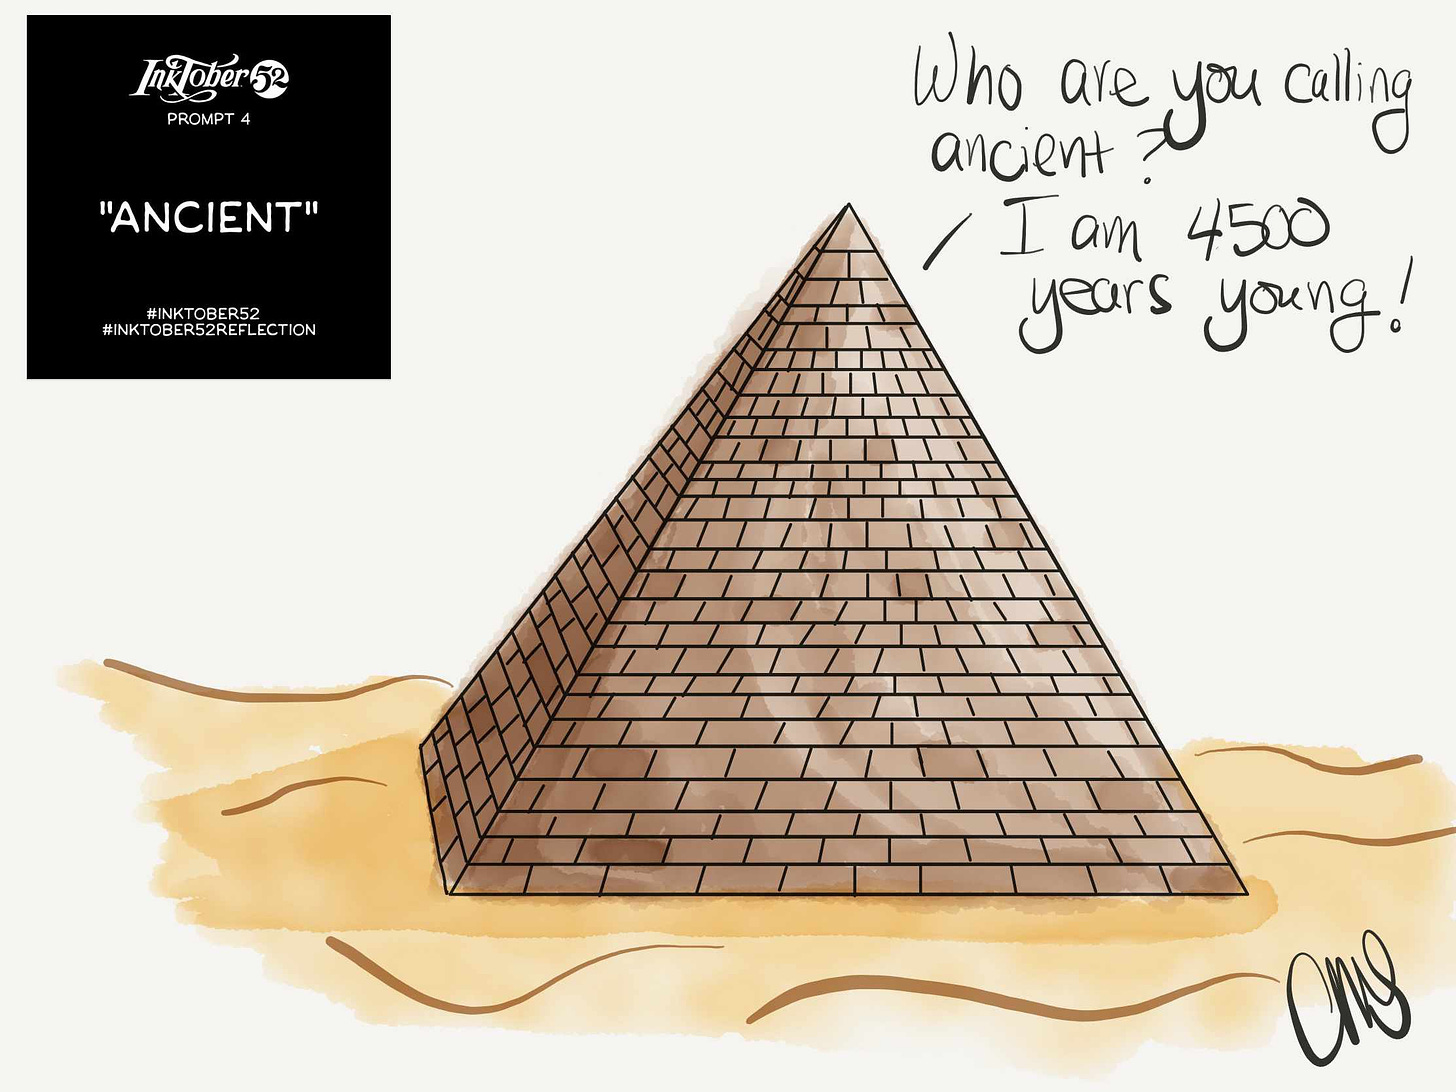 Ink and watercolor digital drawing of a pyramid in the sand. In the upper left corner is the Inktober prompt reading week 4 ancient, and in the upper right corner is hand written text reading “Who you calling ancient? I am 4500 years young!”